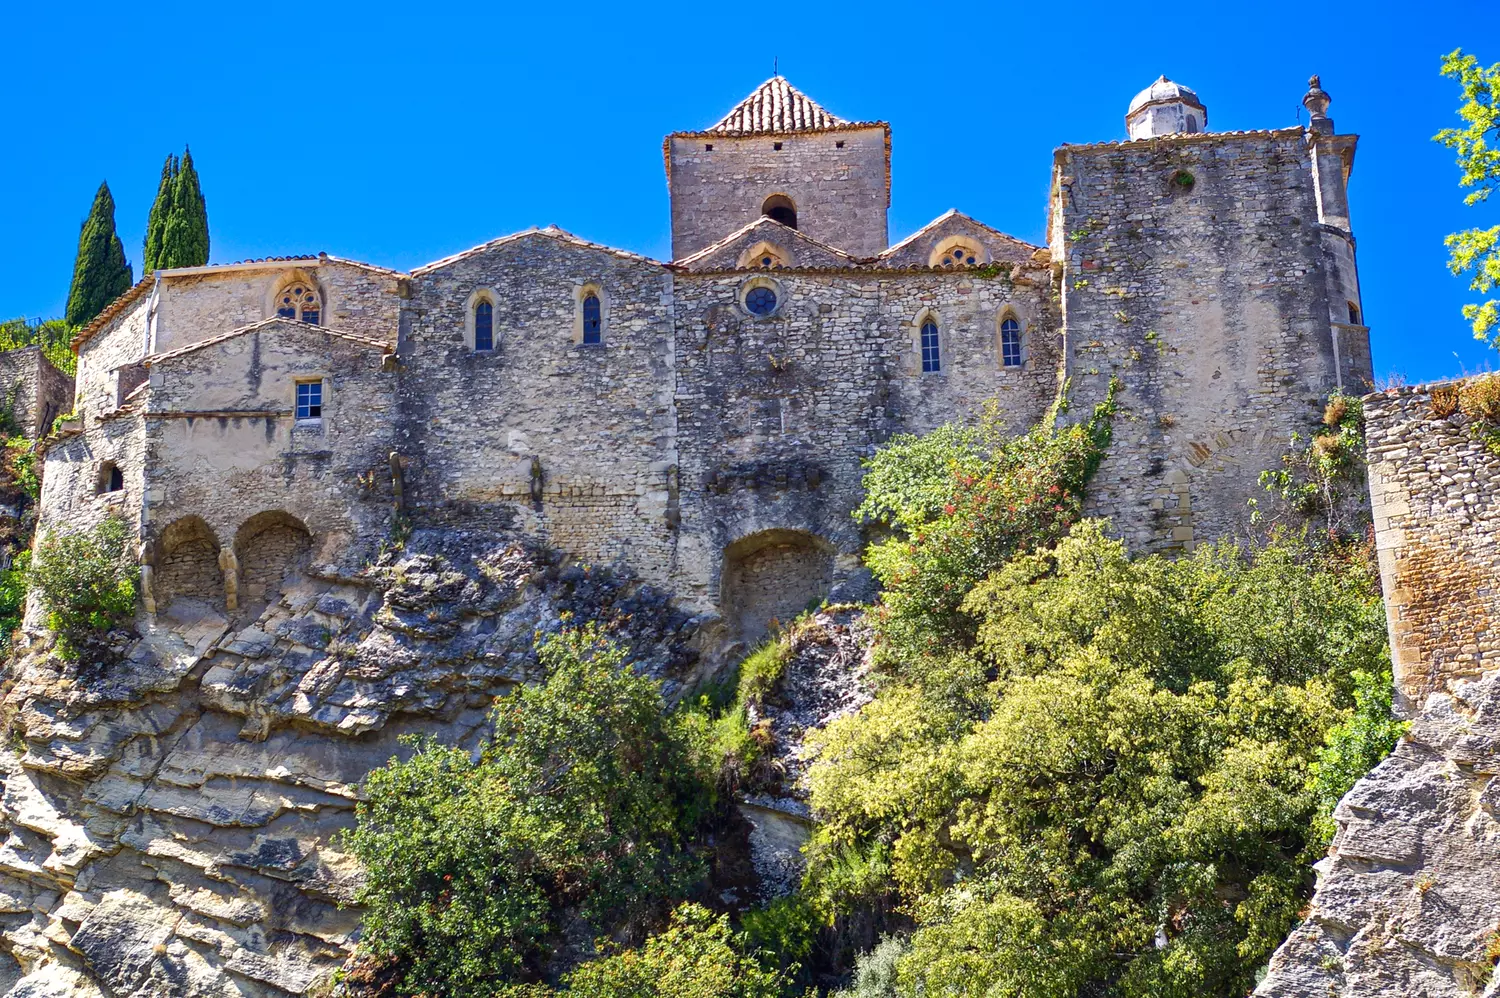 4 good reasons to stop off in Vaison-la-Romaine